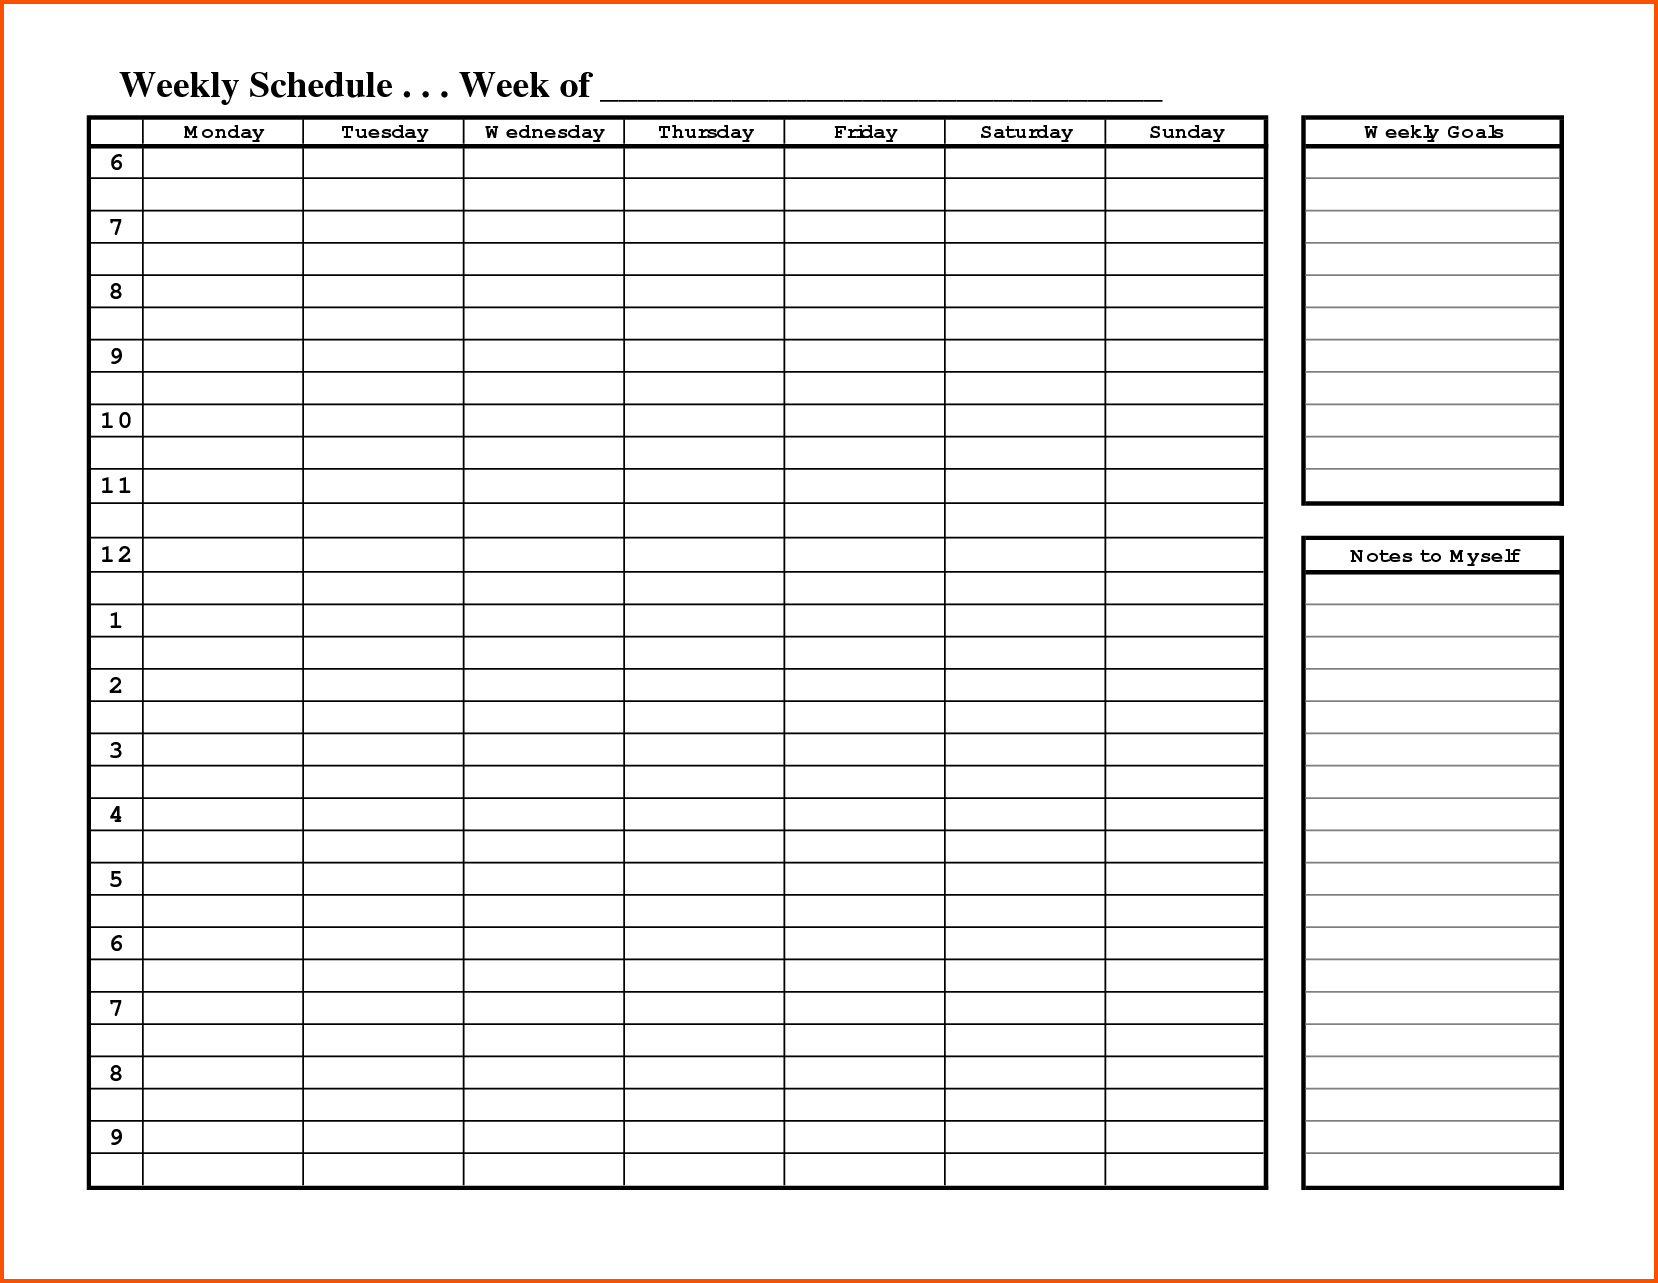 Free Printable Weekly Employee Schedule Template With Weekly Goals 